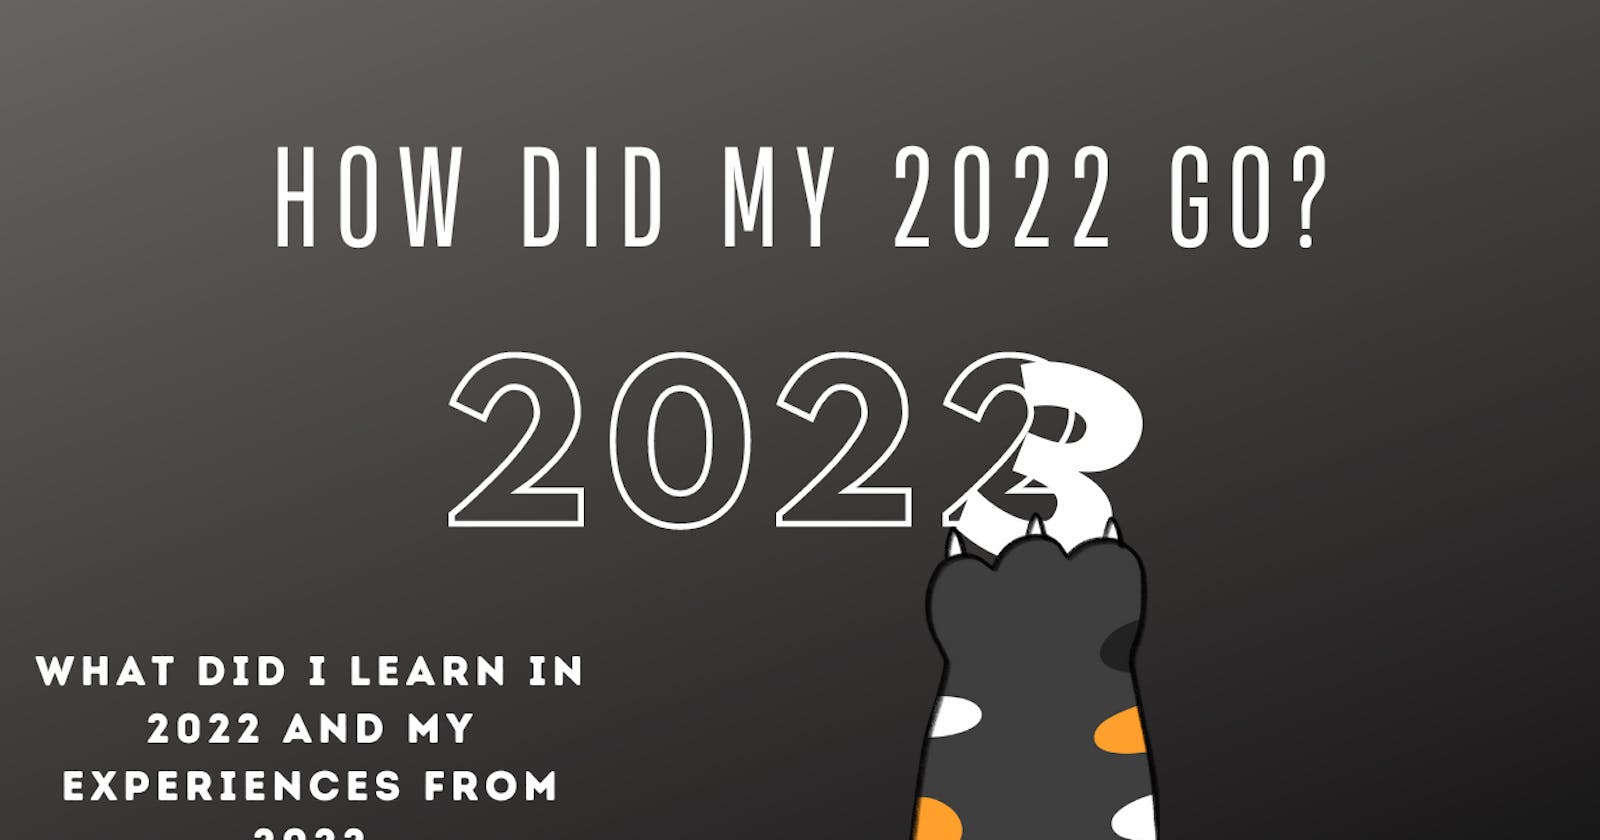 How did my 2022 go?